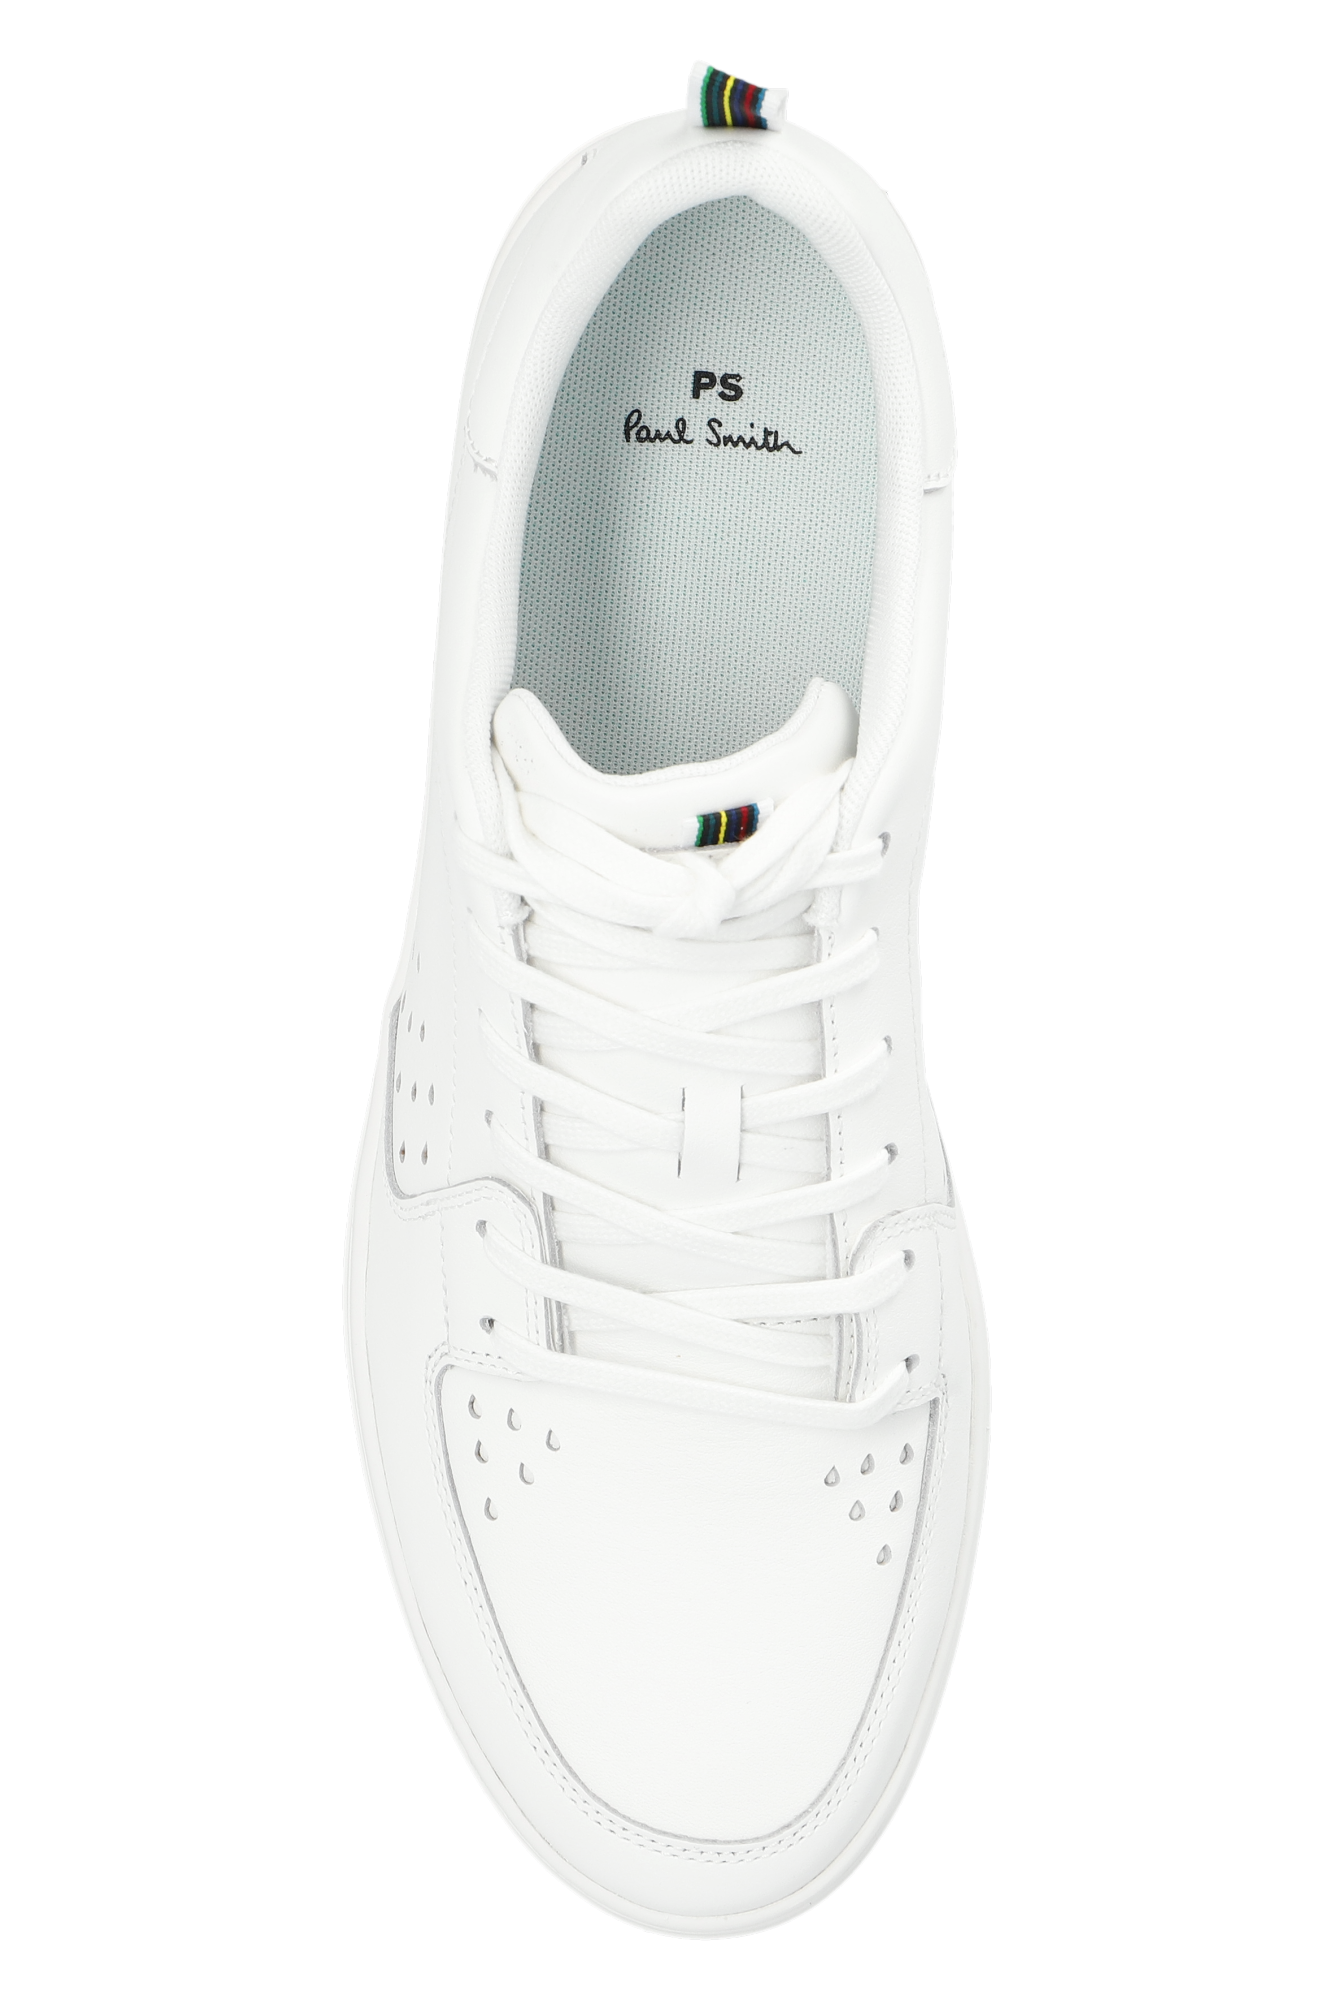 PS Paul Smith ‘Cosmo’ sneakers